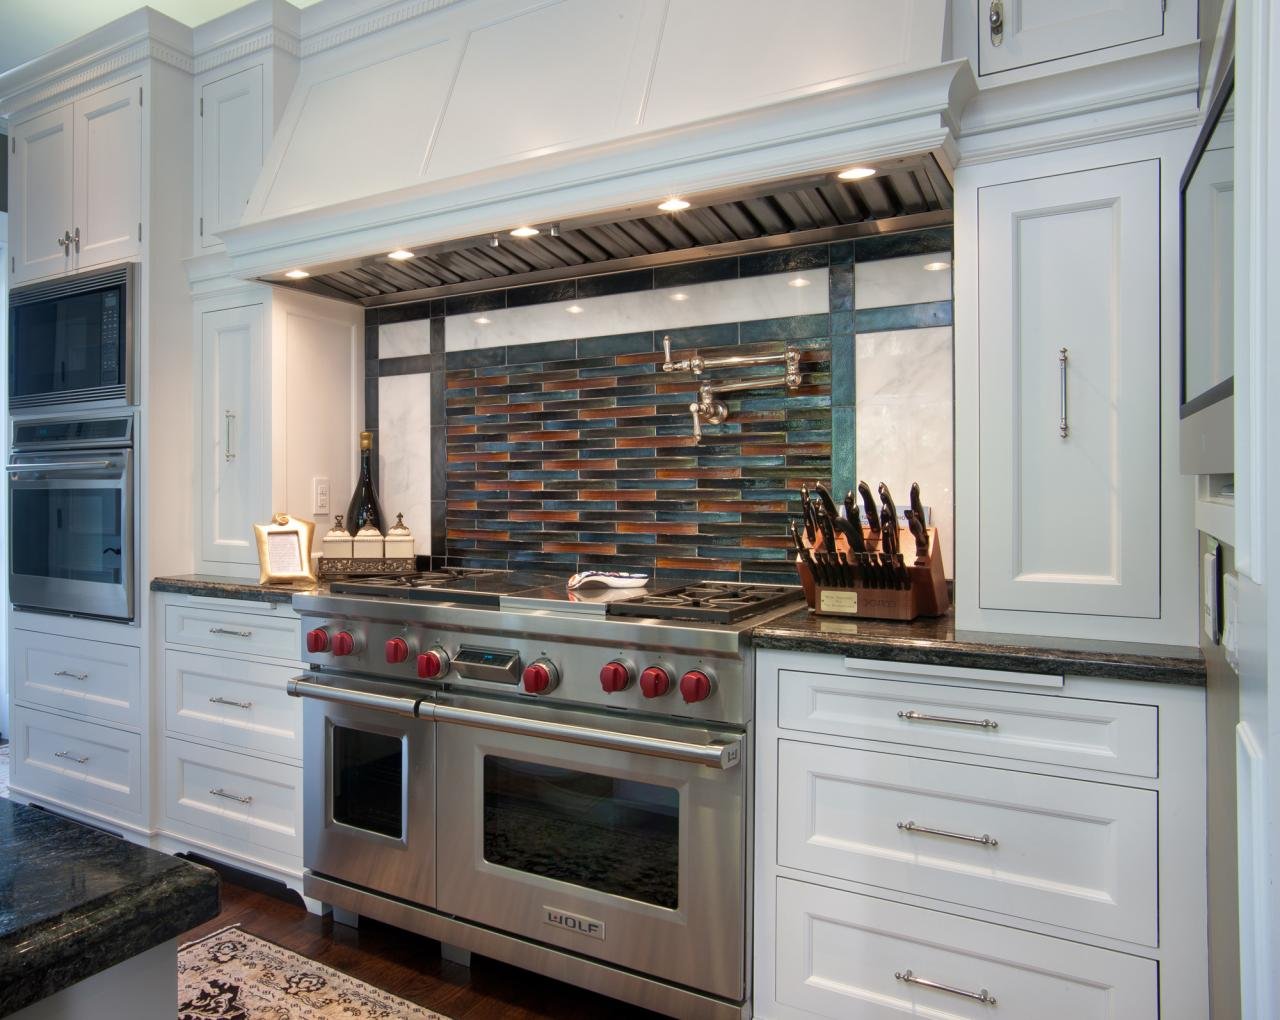 THE KITCHEN’S WOLF RANGE, BACKED BY BASKET WEAVE GLASS TILES, SITS UNDER A CUSTOM HOOD.